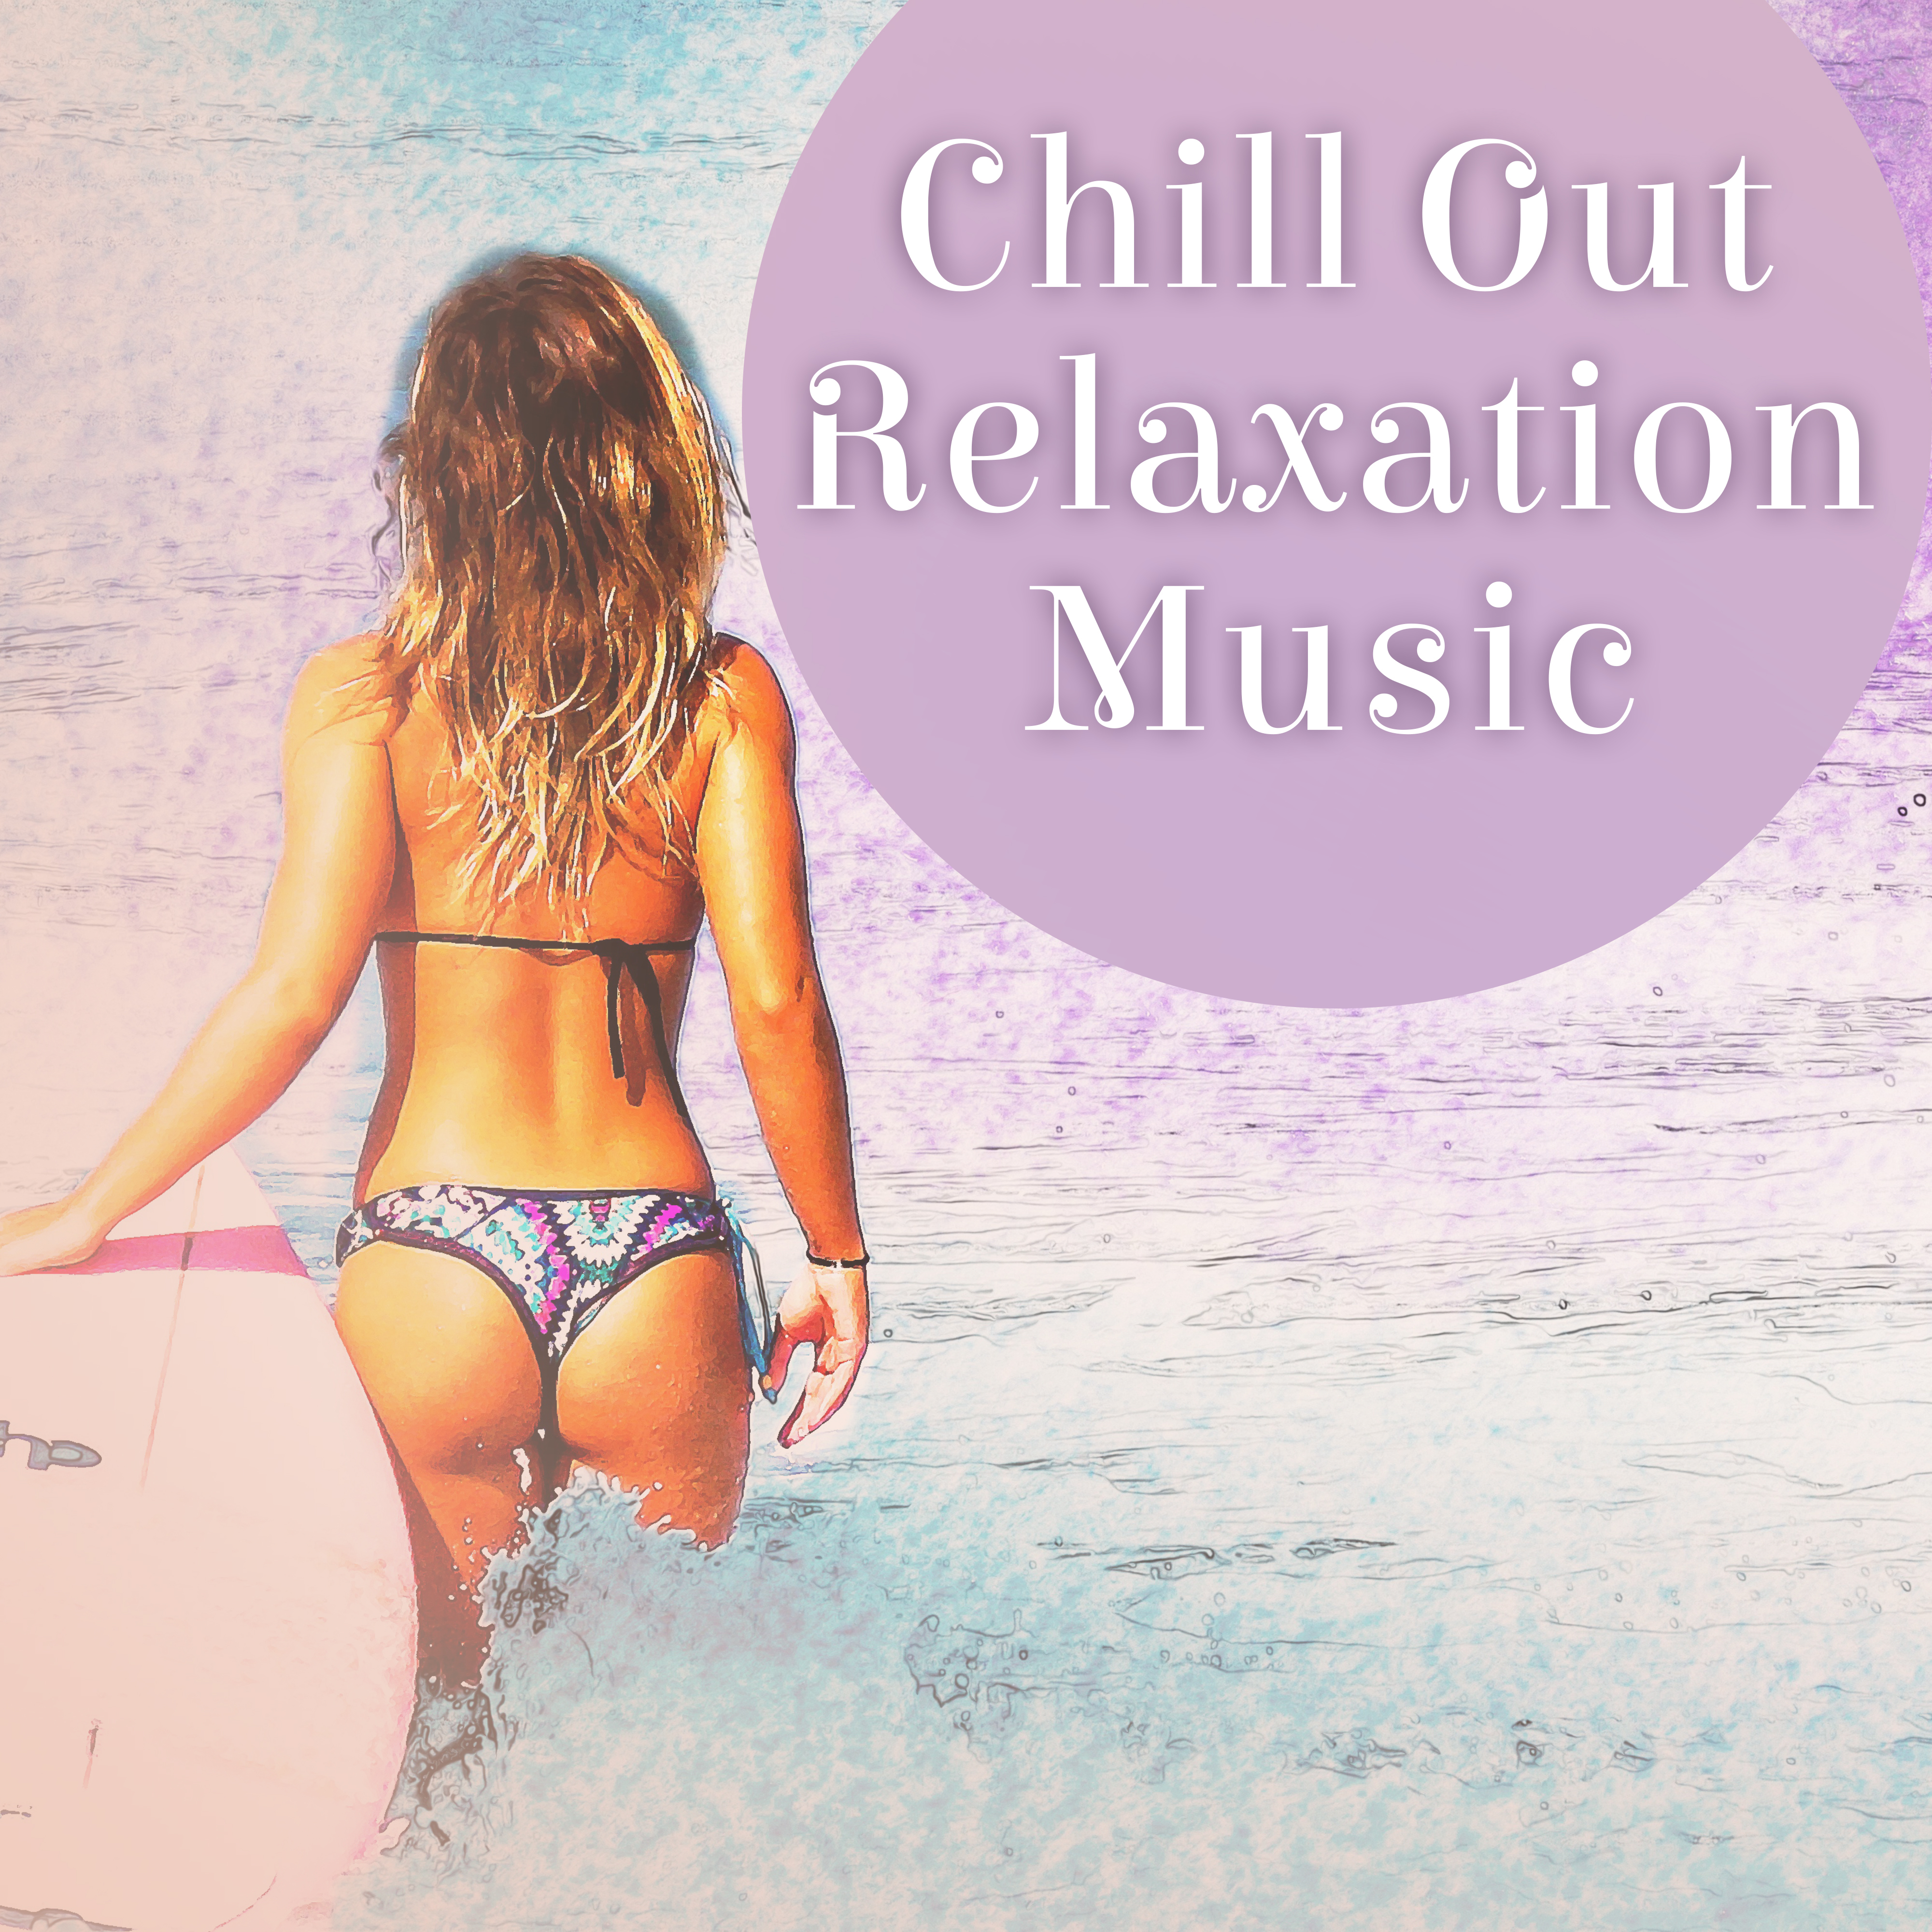 Chill Out Relaxation Music – Stress Relief, Chillout Yourself, Music for Summertime, Holiday Rest